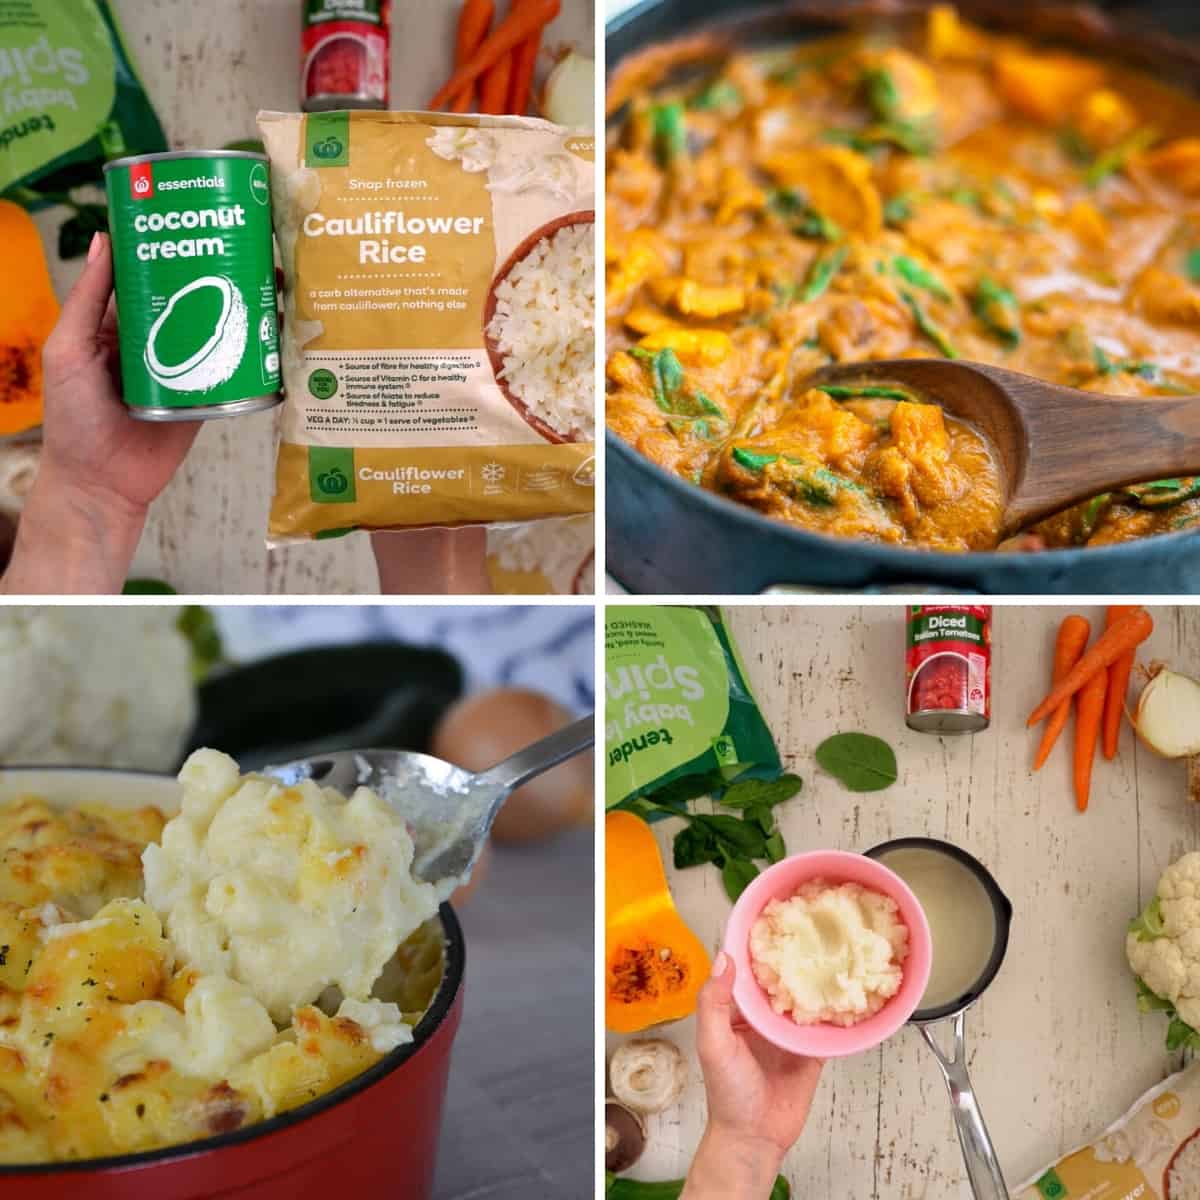 Collage of images showing cauliflower puree being used in meals